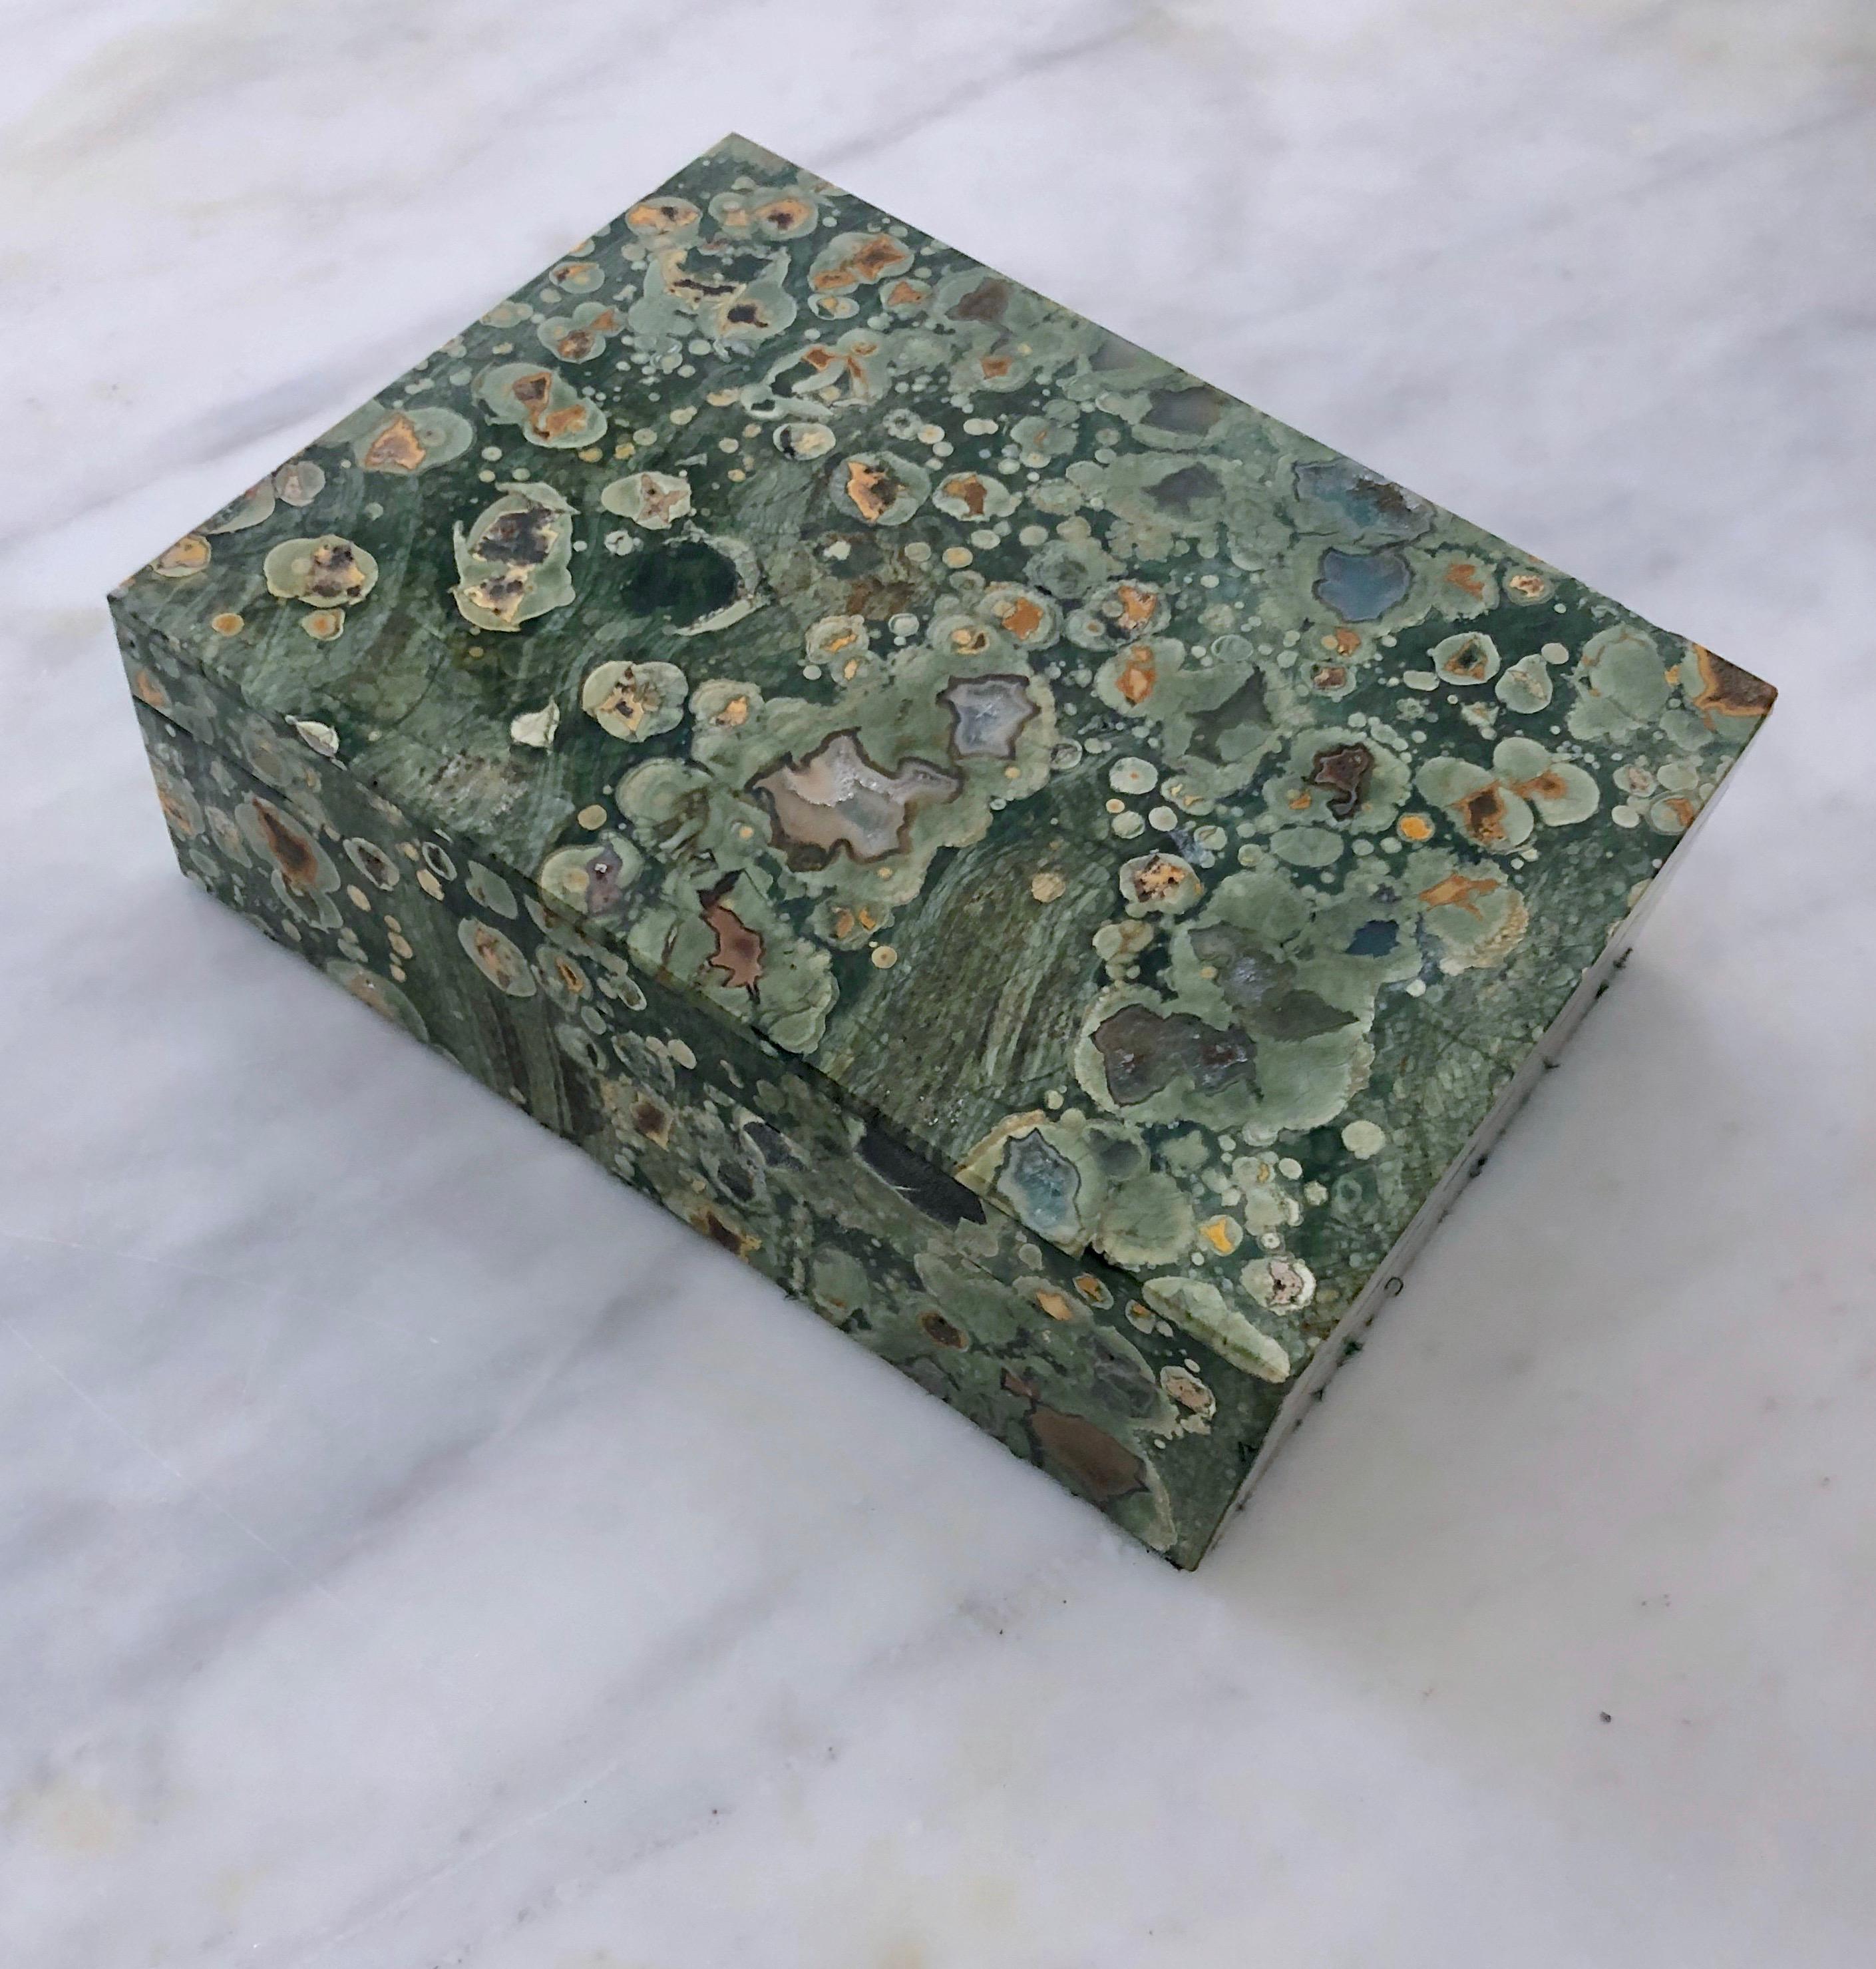 This box is made of a stone called 'Ocean Jasper' or orbicular jasper originating from Madagascar. It has beautiful spherical patterns with quartz druzy inclusions. The box has a brass hinge and is lined with green felt in what appears to be unused